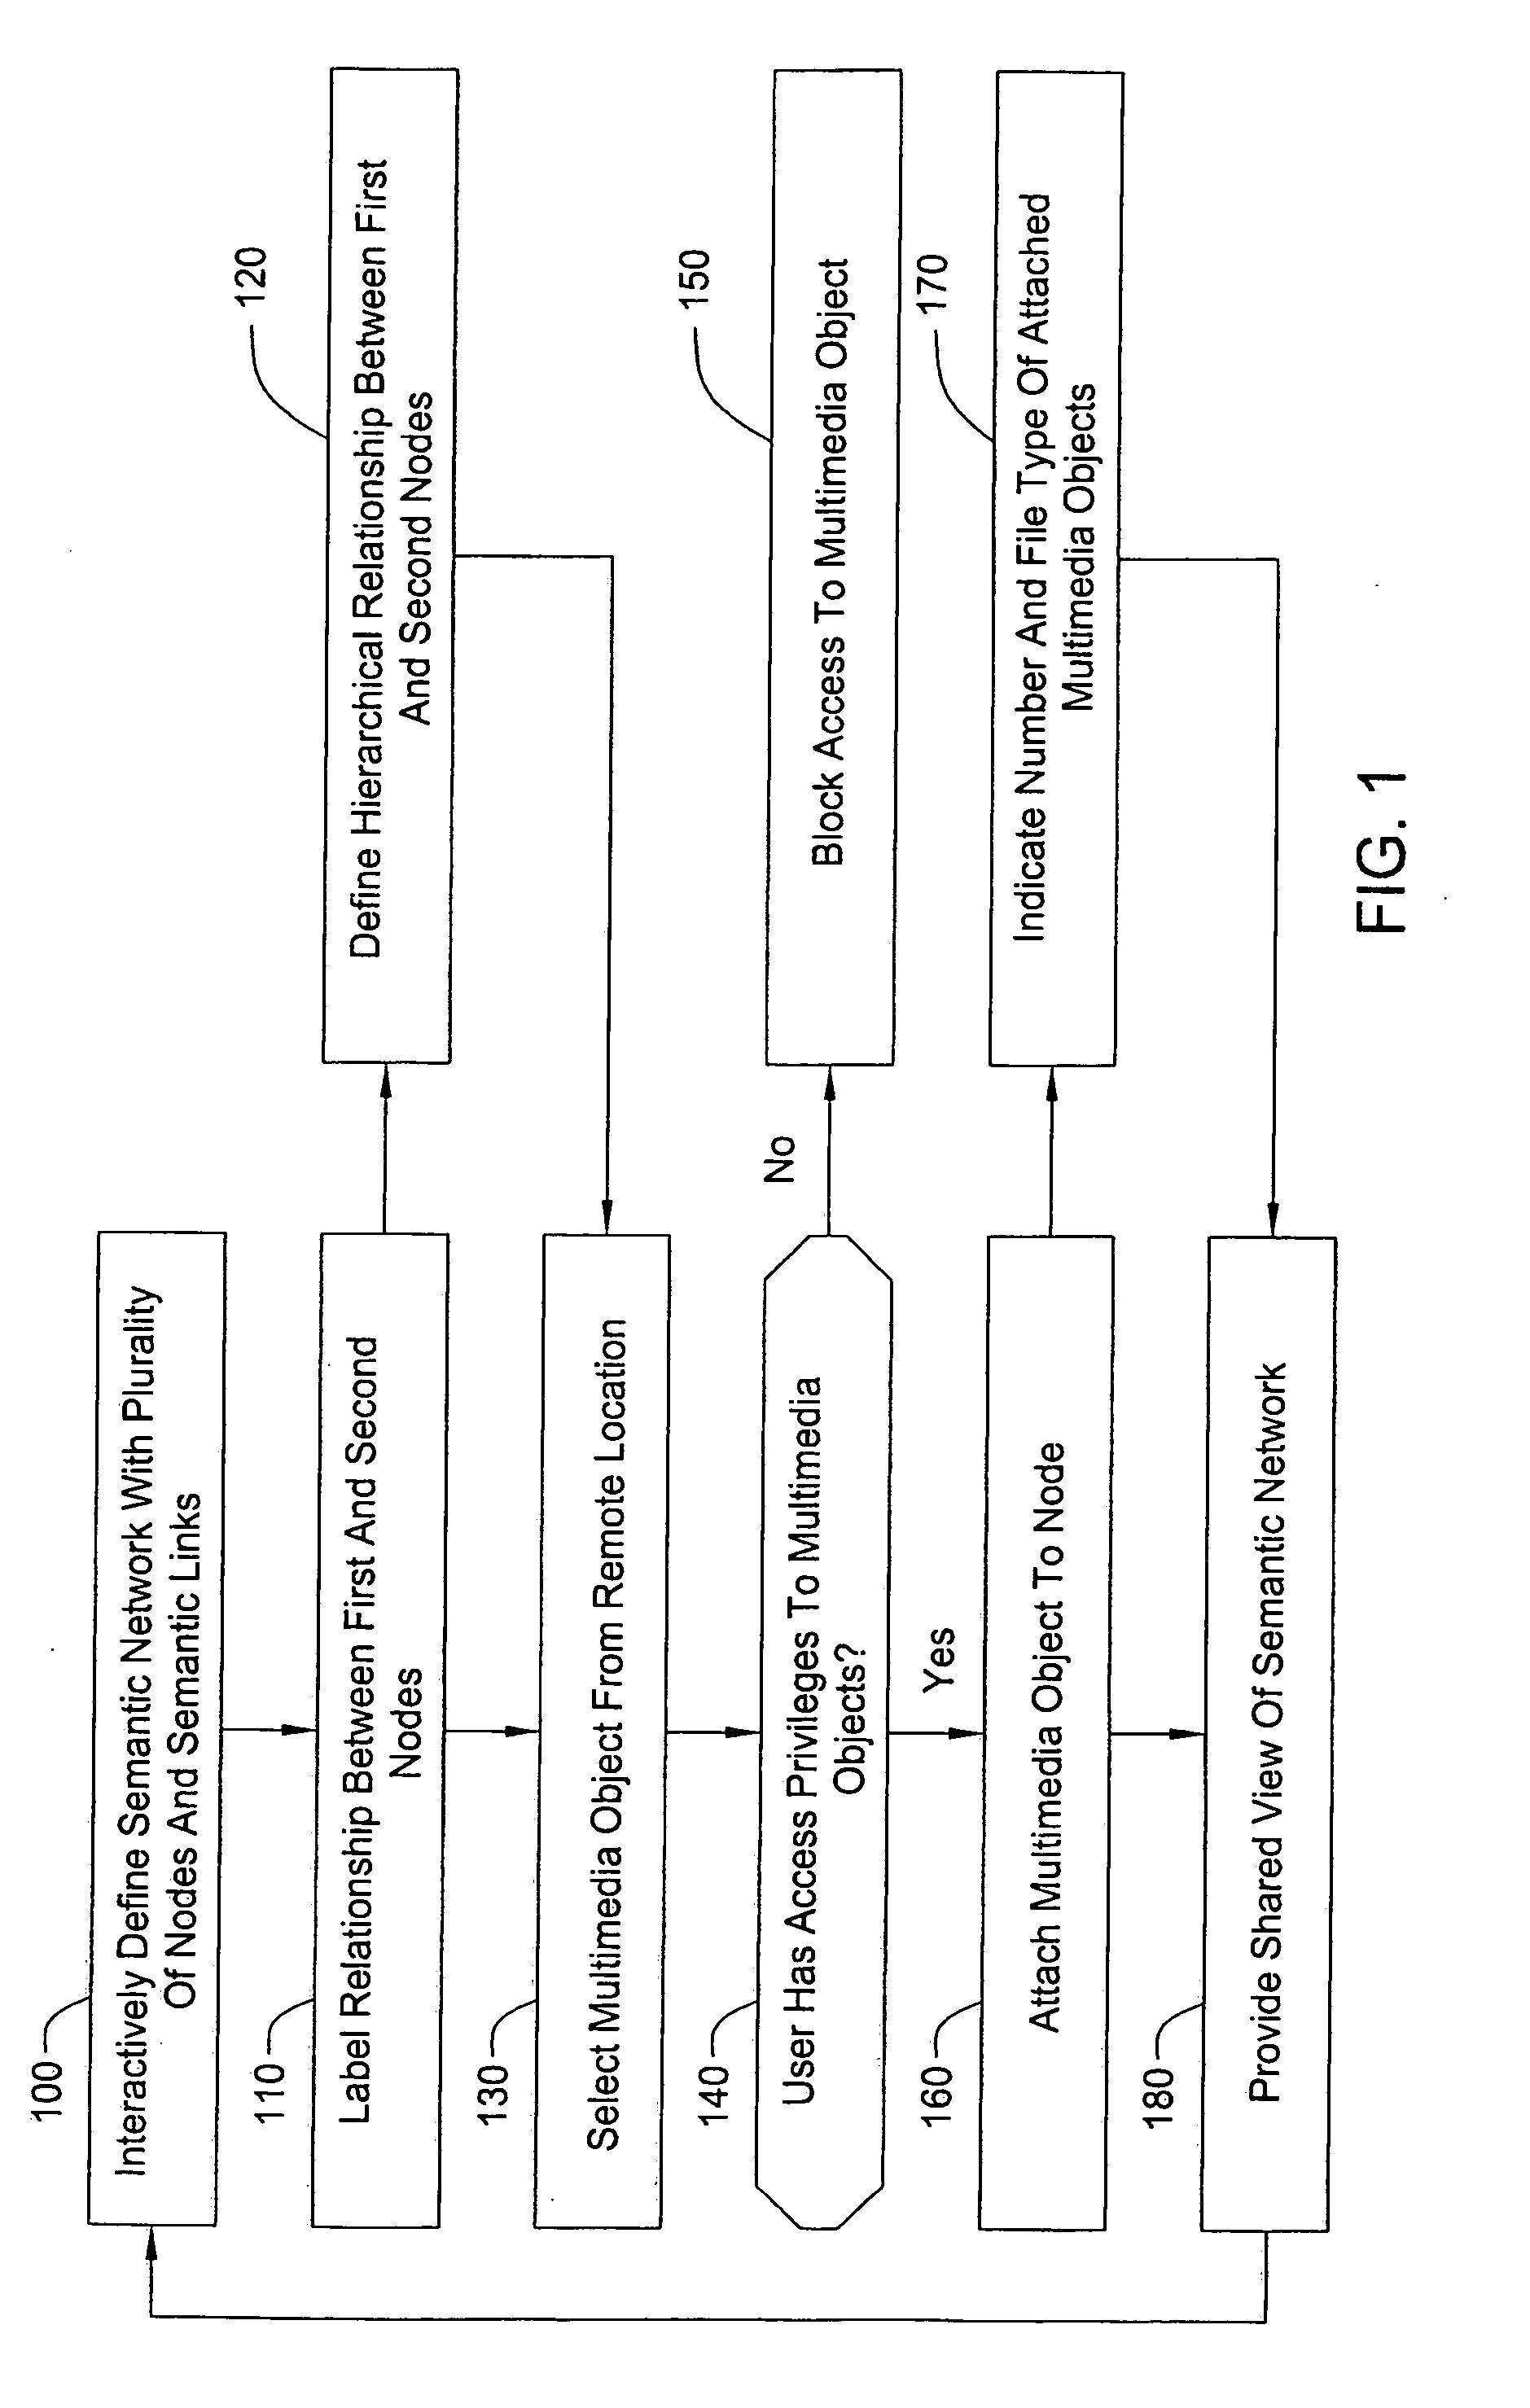 Methods and apparatus for storing, organizing, sharing and rating multimedia objects and documents